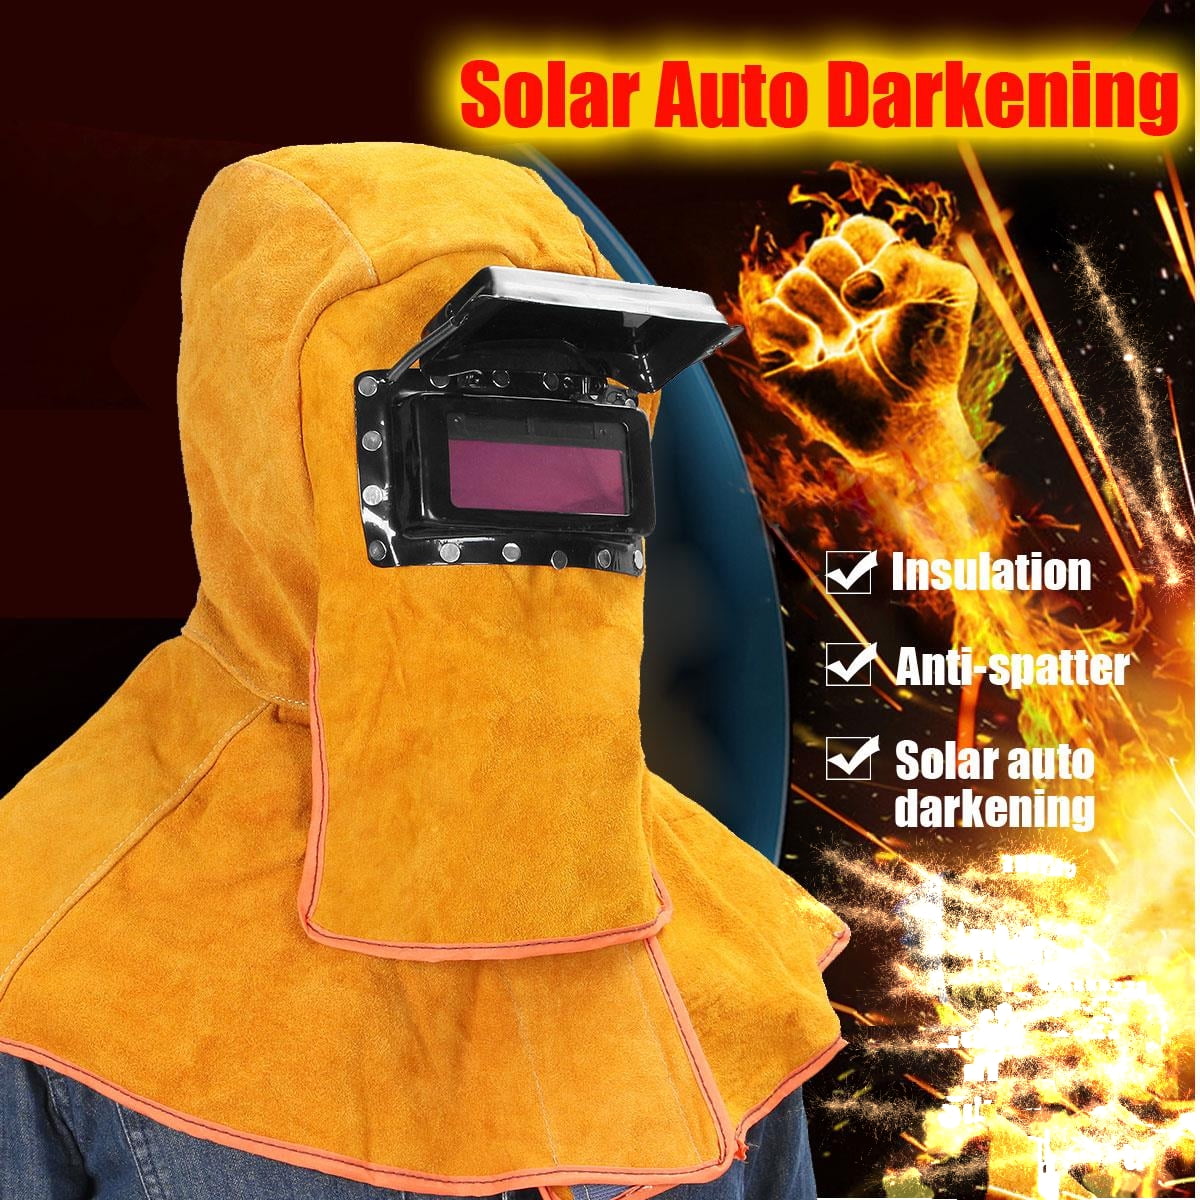 Details about   YTBD  AUTO DARKENING WELDING/GRINDING HELMET Hood+1 carrying bag+1 clear cover 